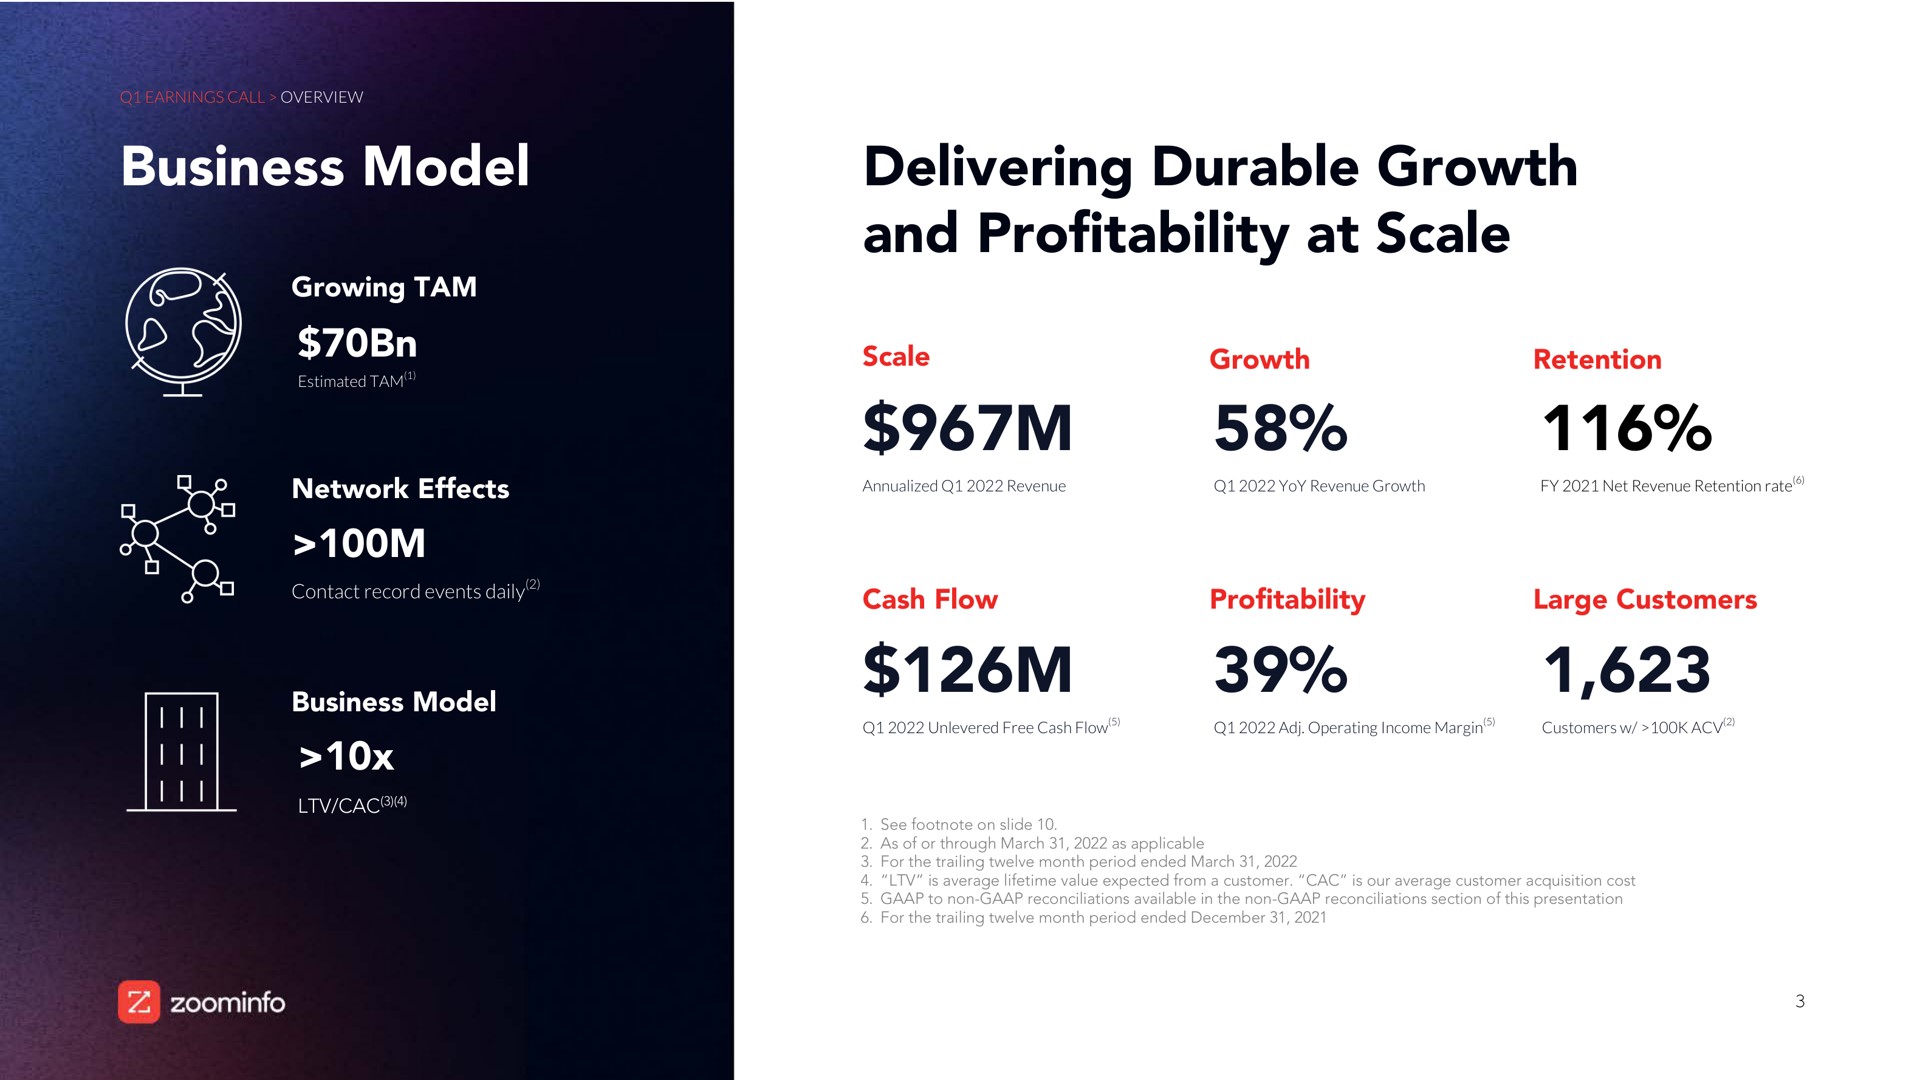 business model delivering durable growth and profitability at scale | Zoominfo